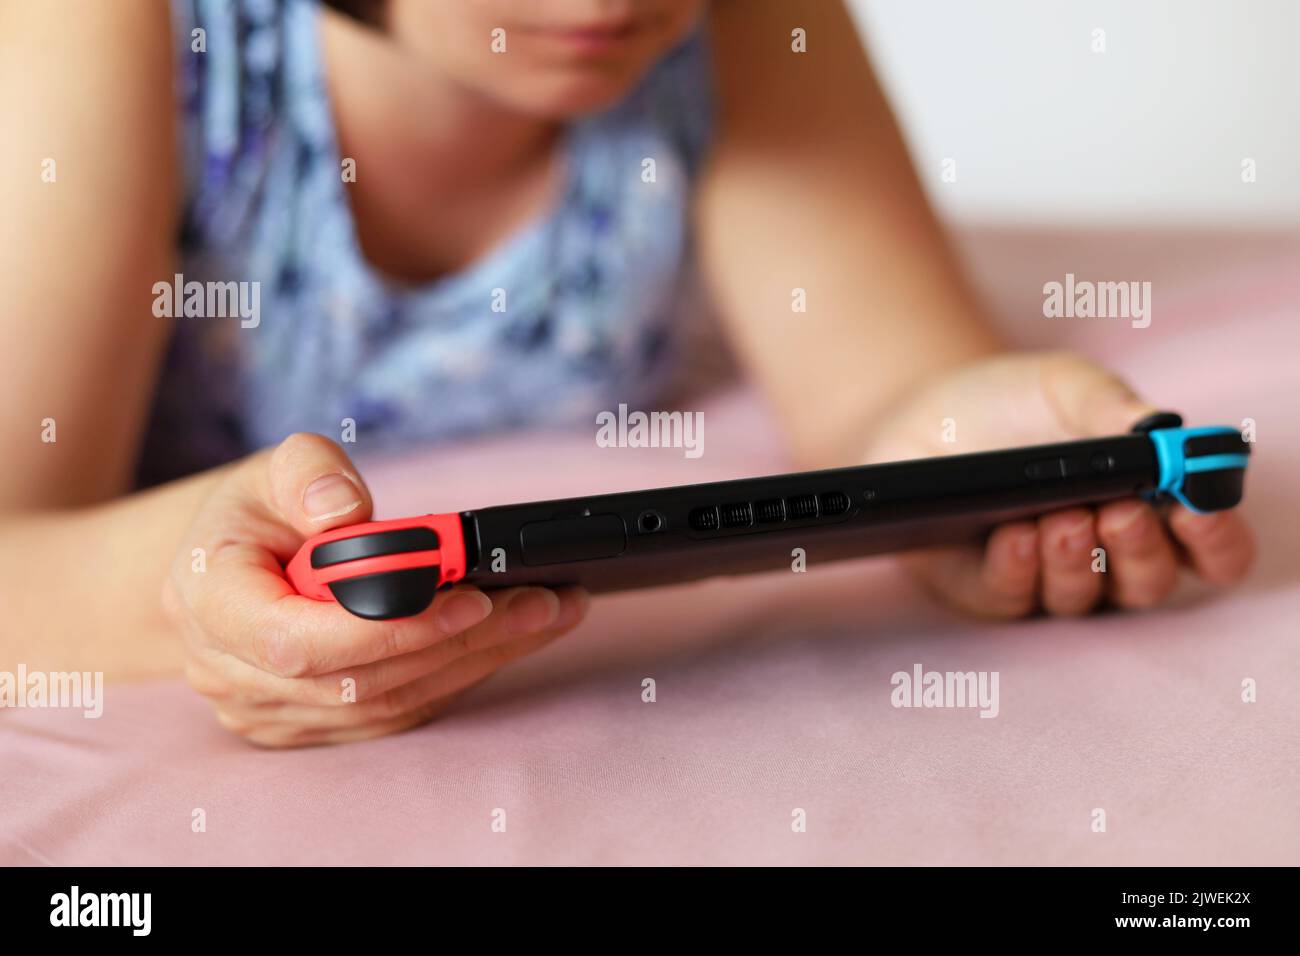 Girl playing game on handheld console lying on a bed, selective focus on a hands Stock Photo